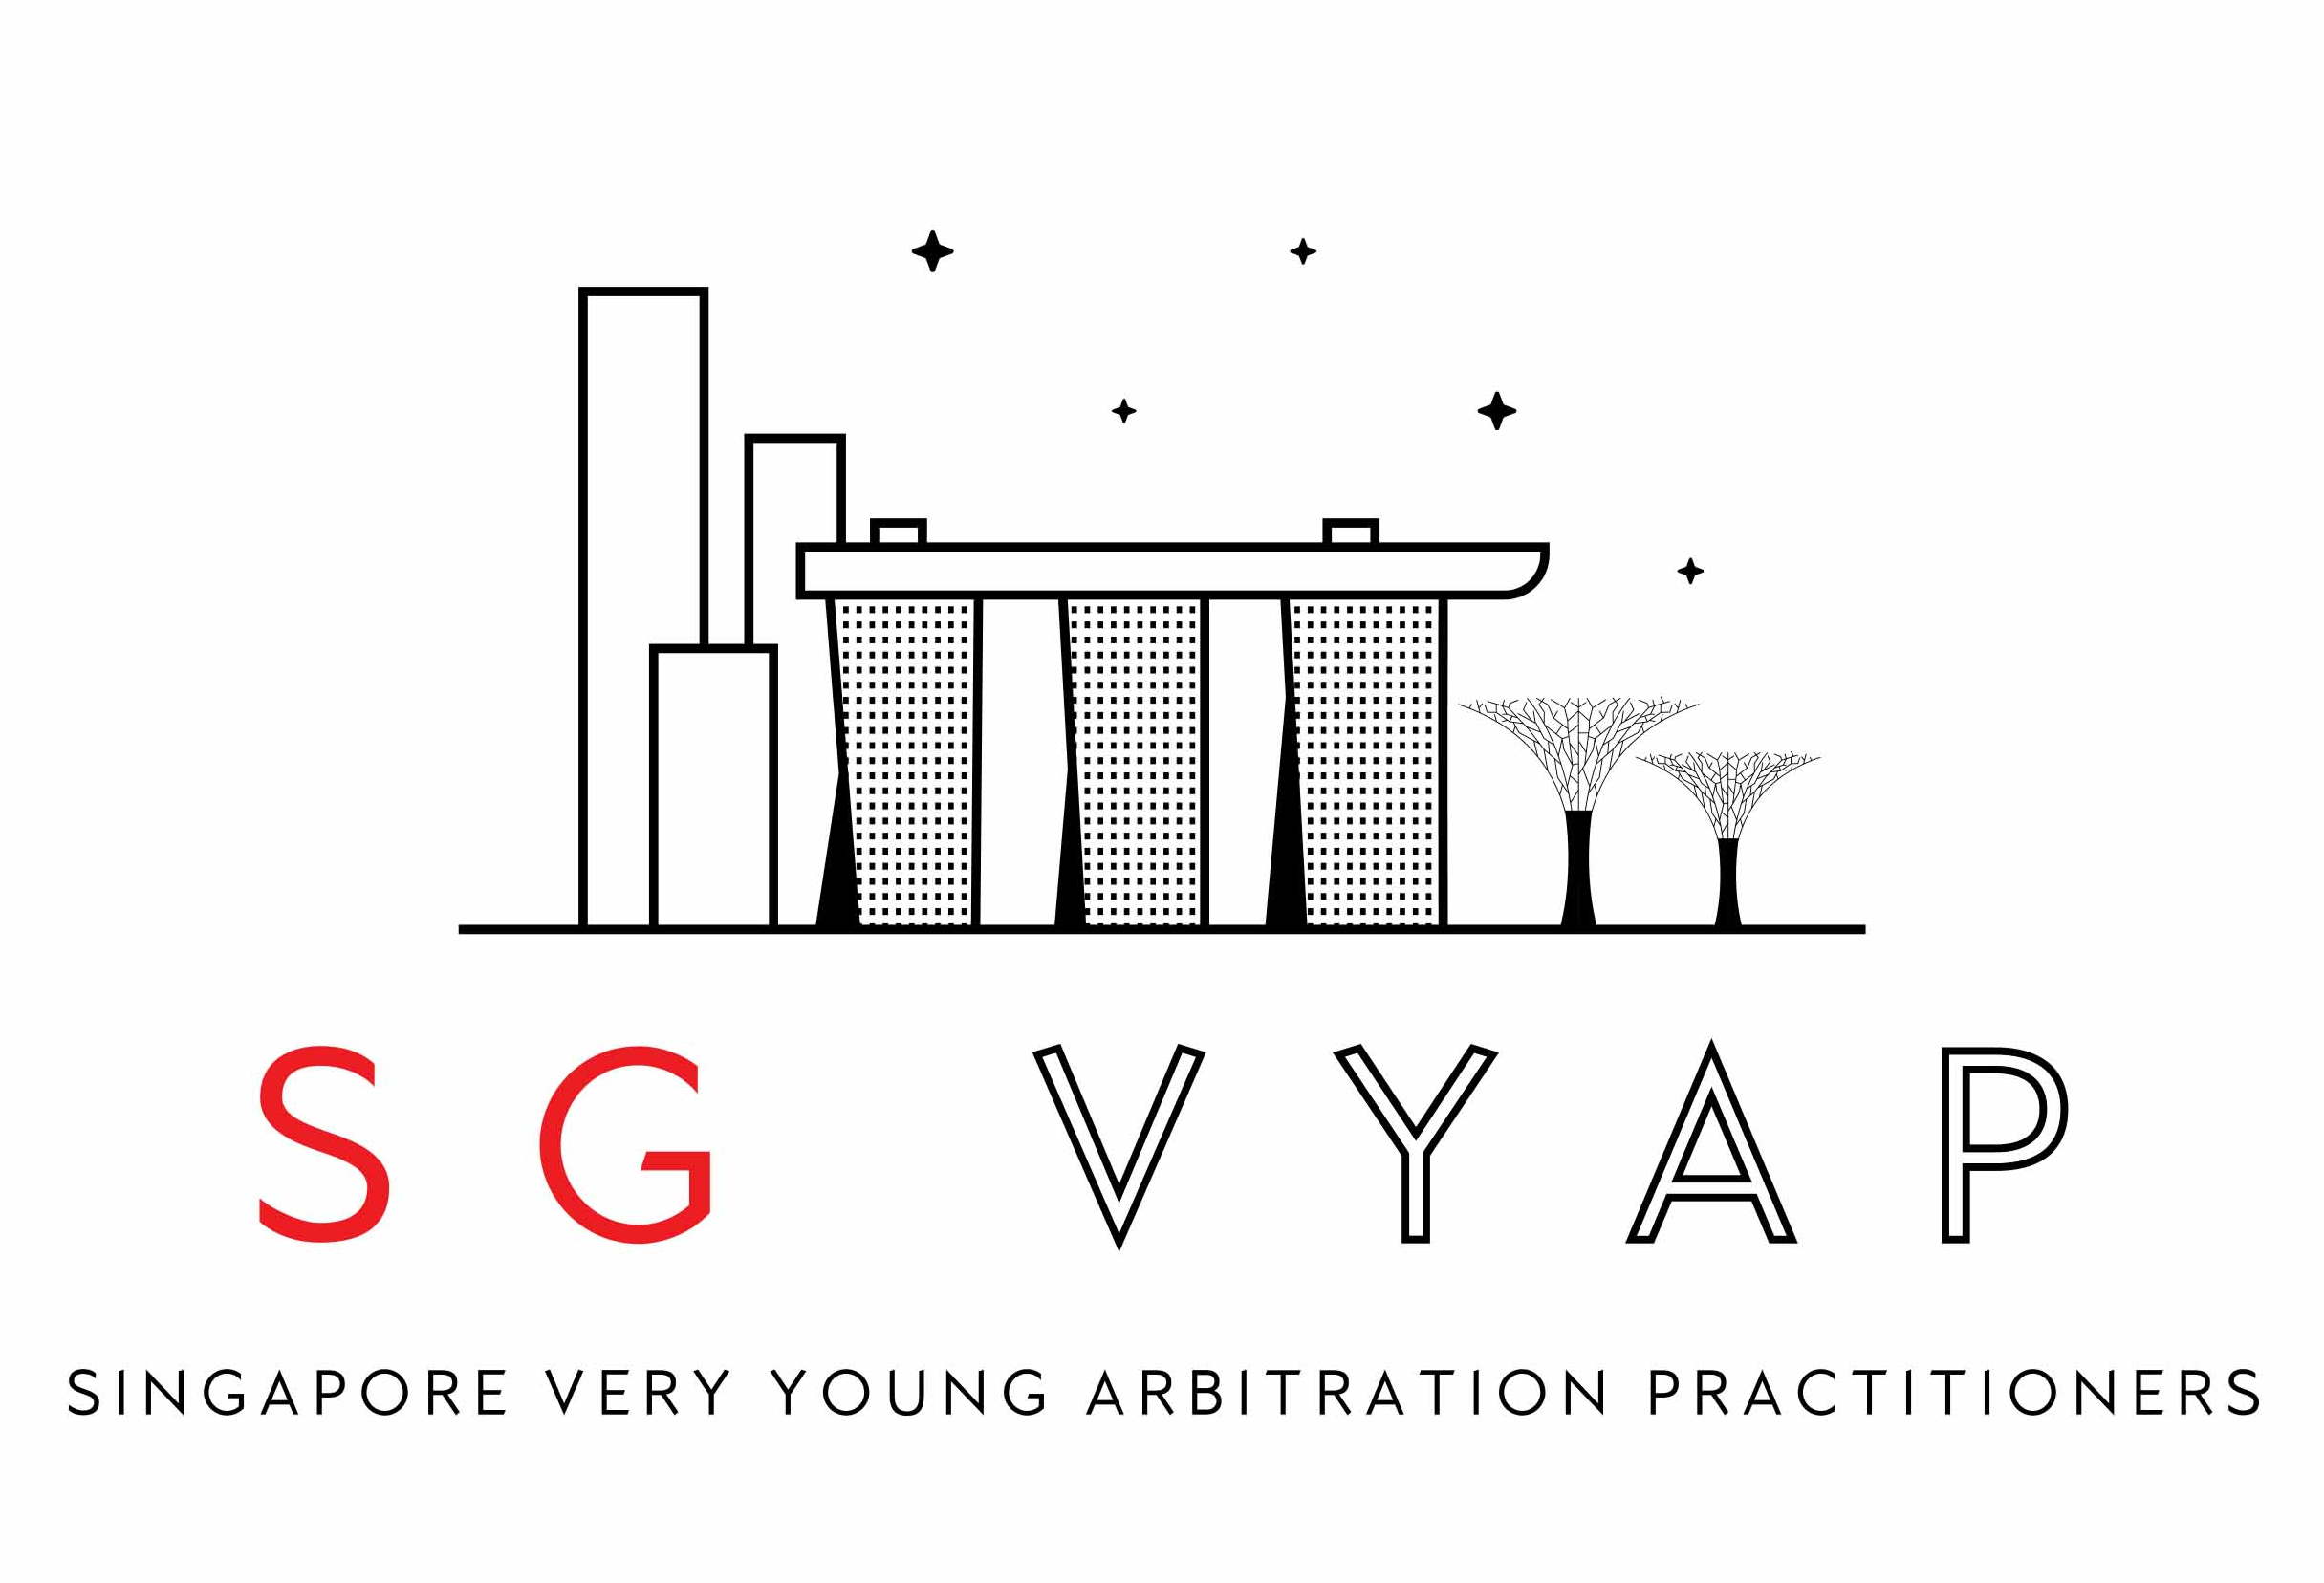 logo of PAW partner SG VYAP (Singapore Very Young Arbitration Practitioners)